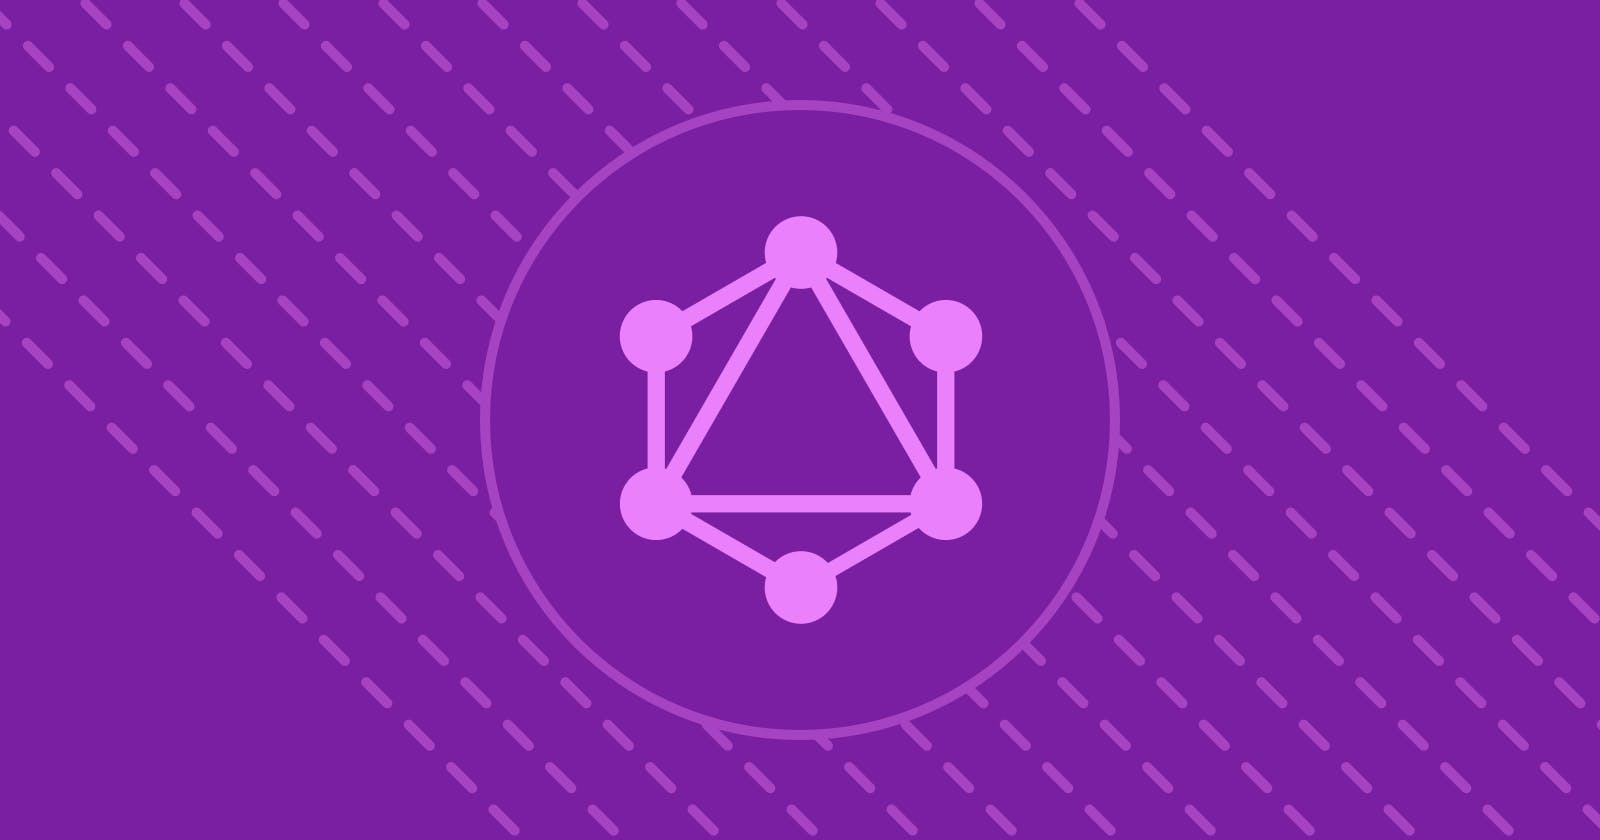 Why GraphQL is the Future of APIs